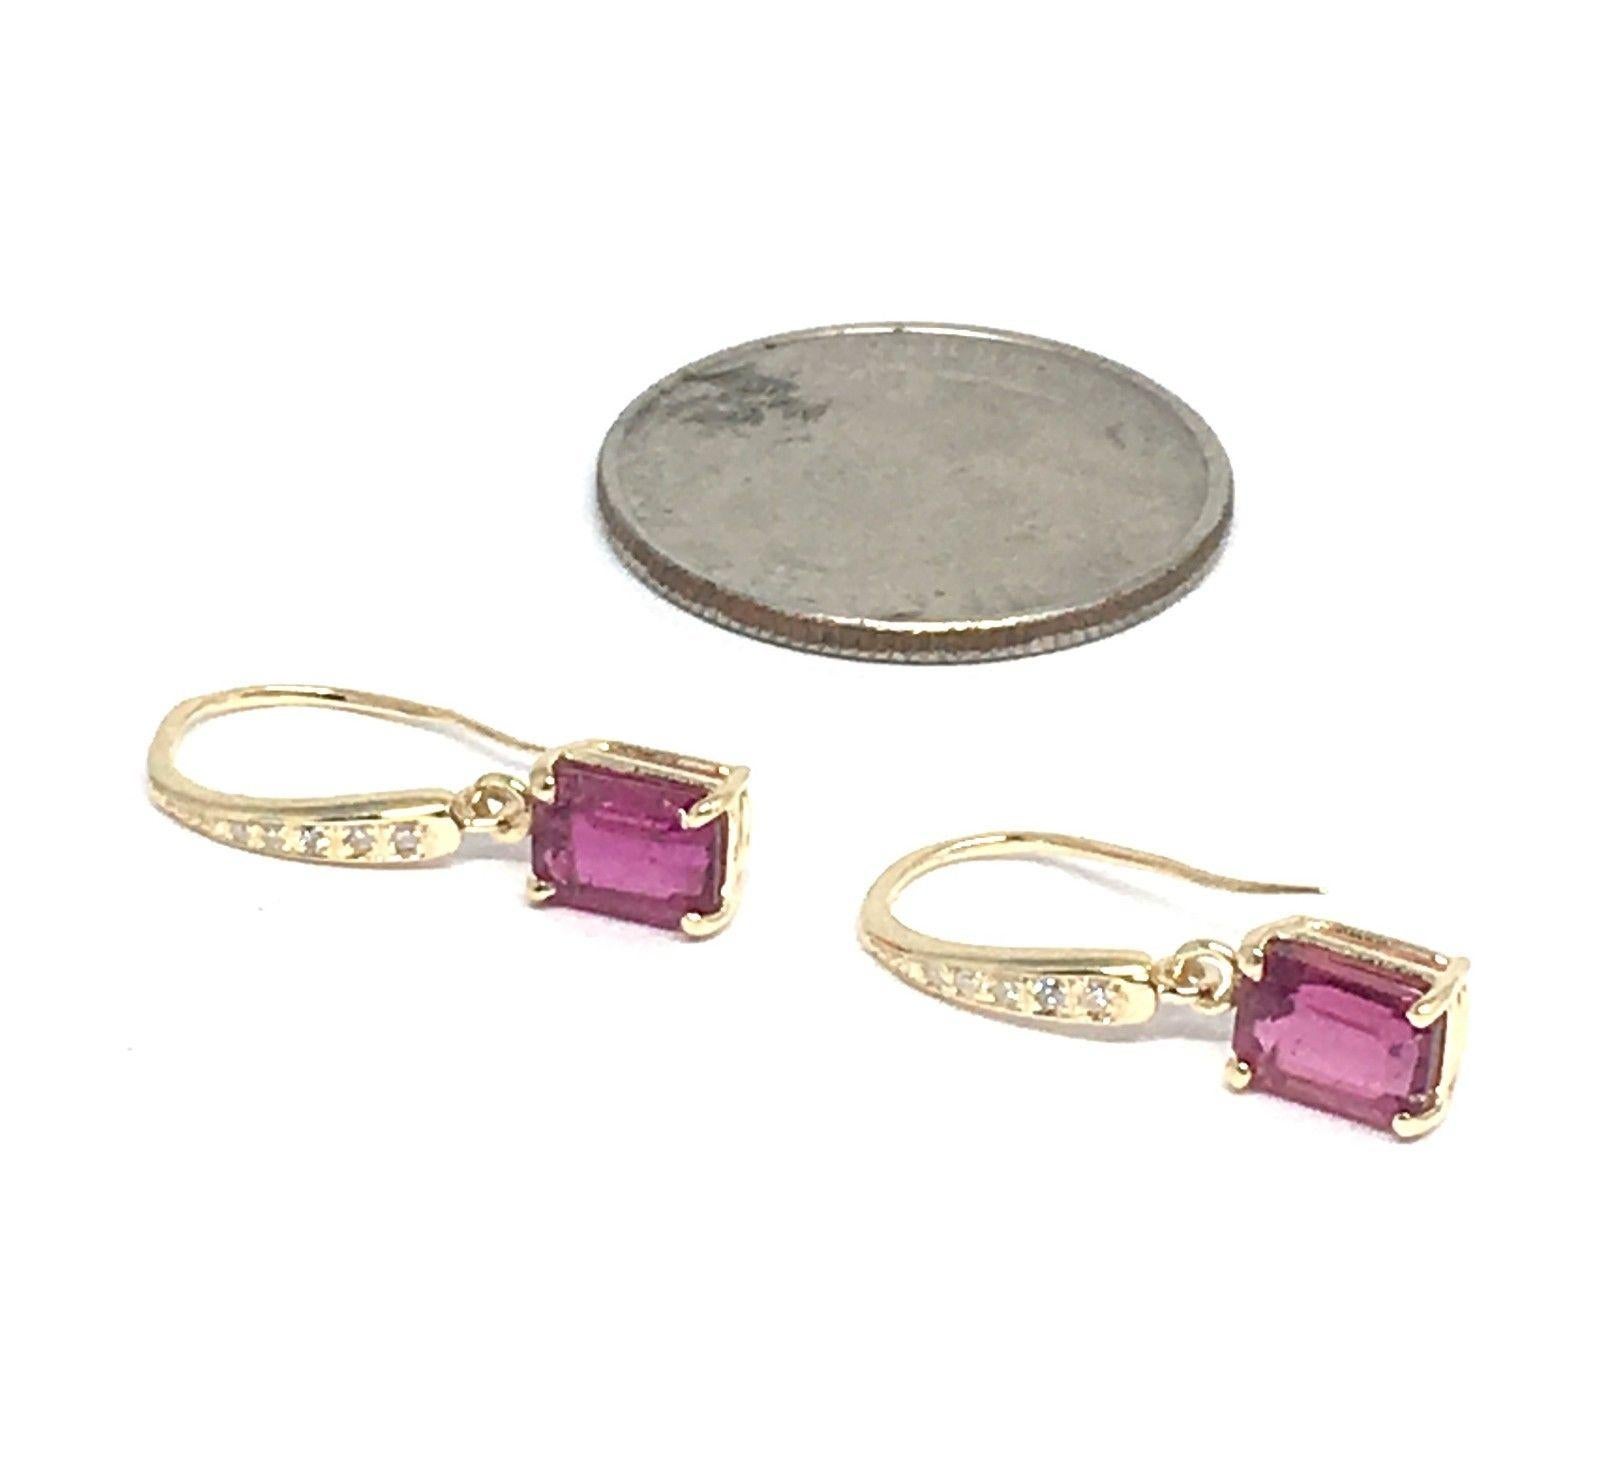 Diamond Rubellite Tourmaline Earrings 14k Gold 2.05 Tcw Certified In New Condition For Sale In Brooklyn, NY